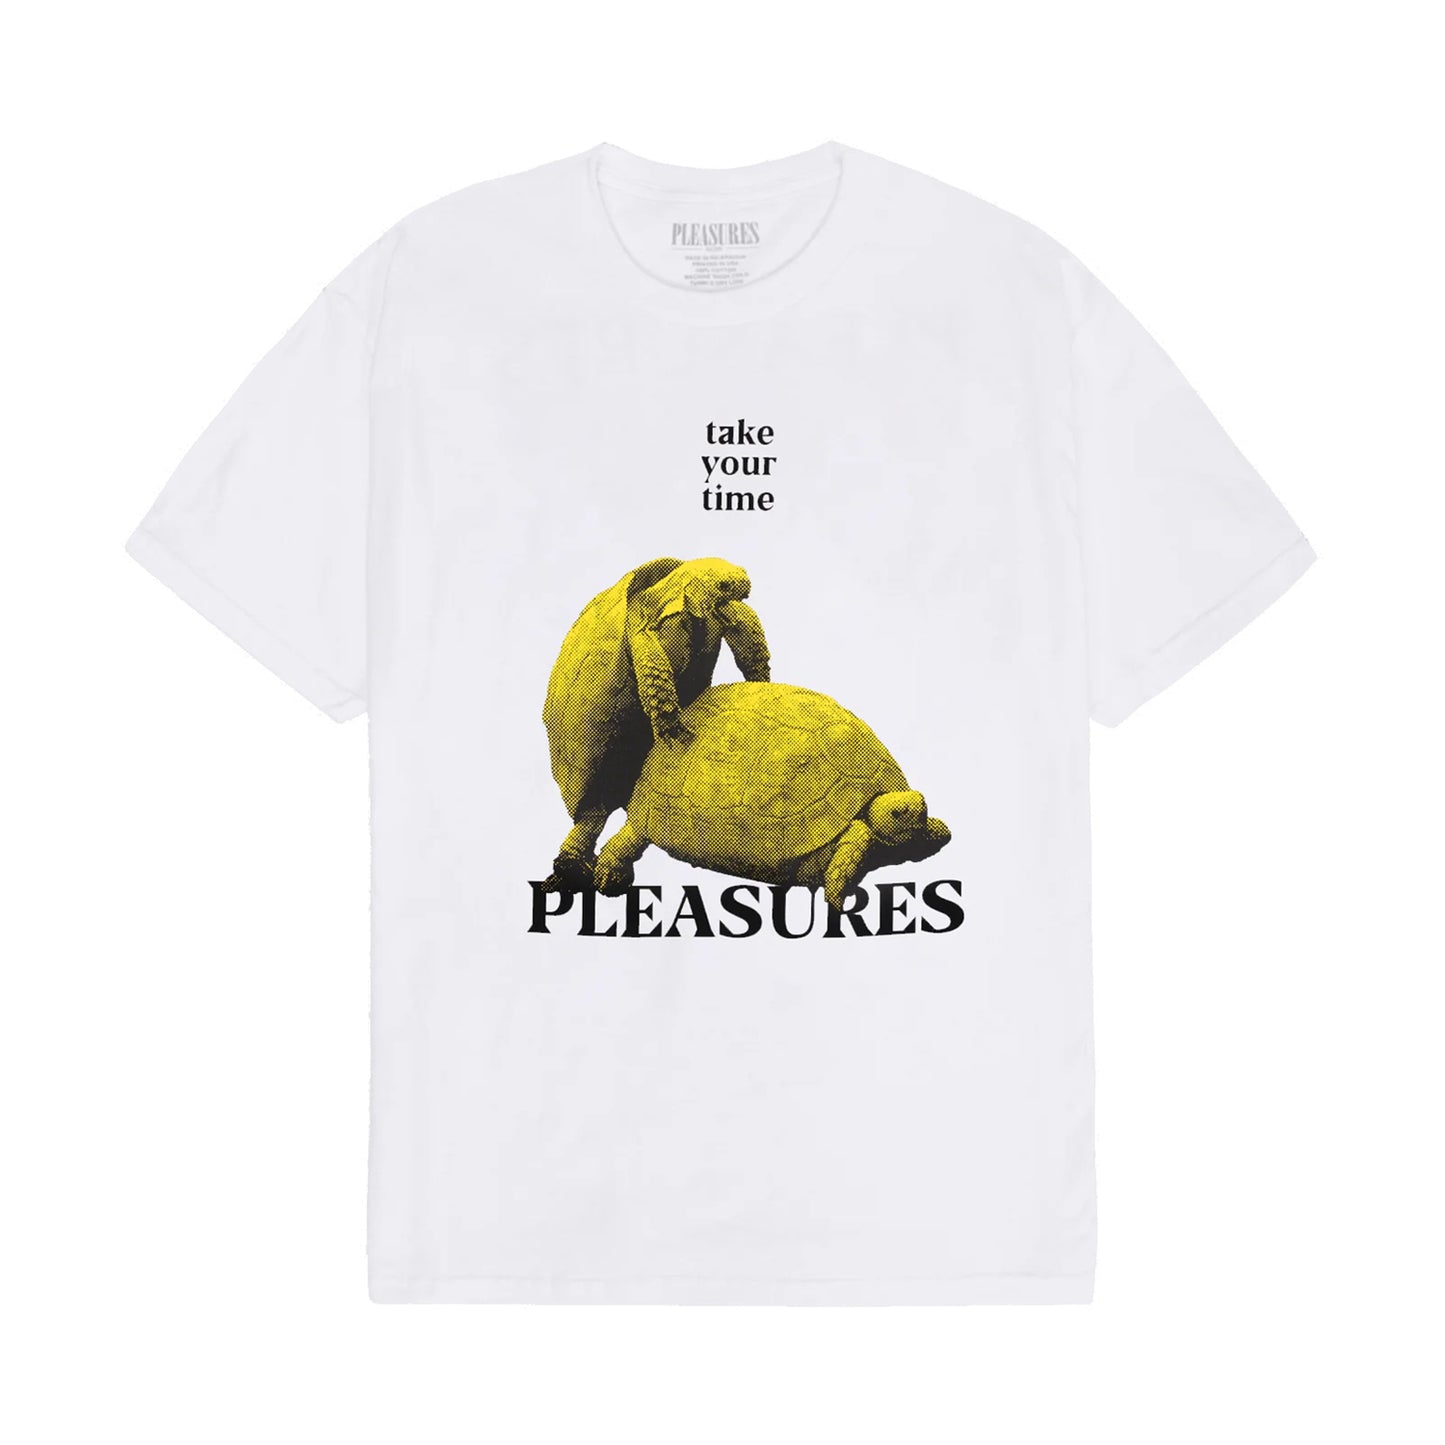 PLEASURES YOUR TIME T-SHIRT